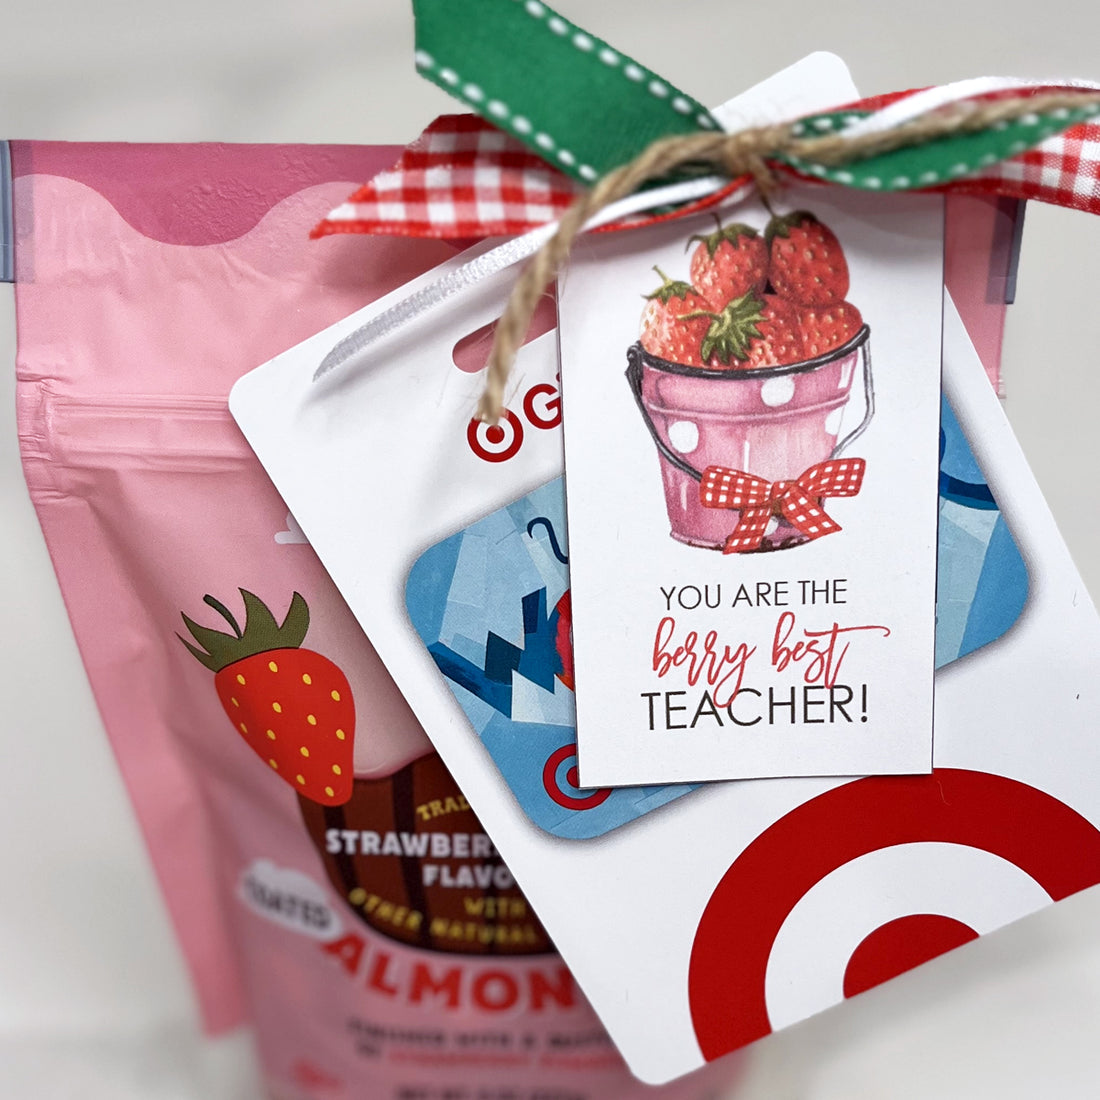 Show Your Appreciation with Our "You Are the Berry Best Teacher" Printable Tag!